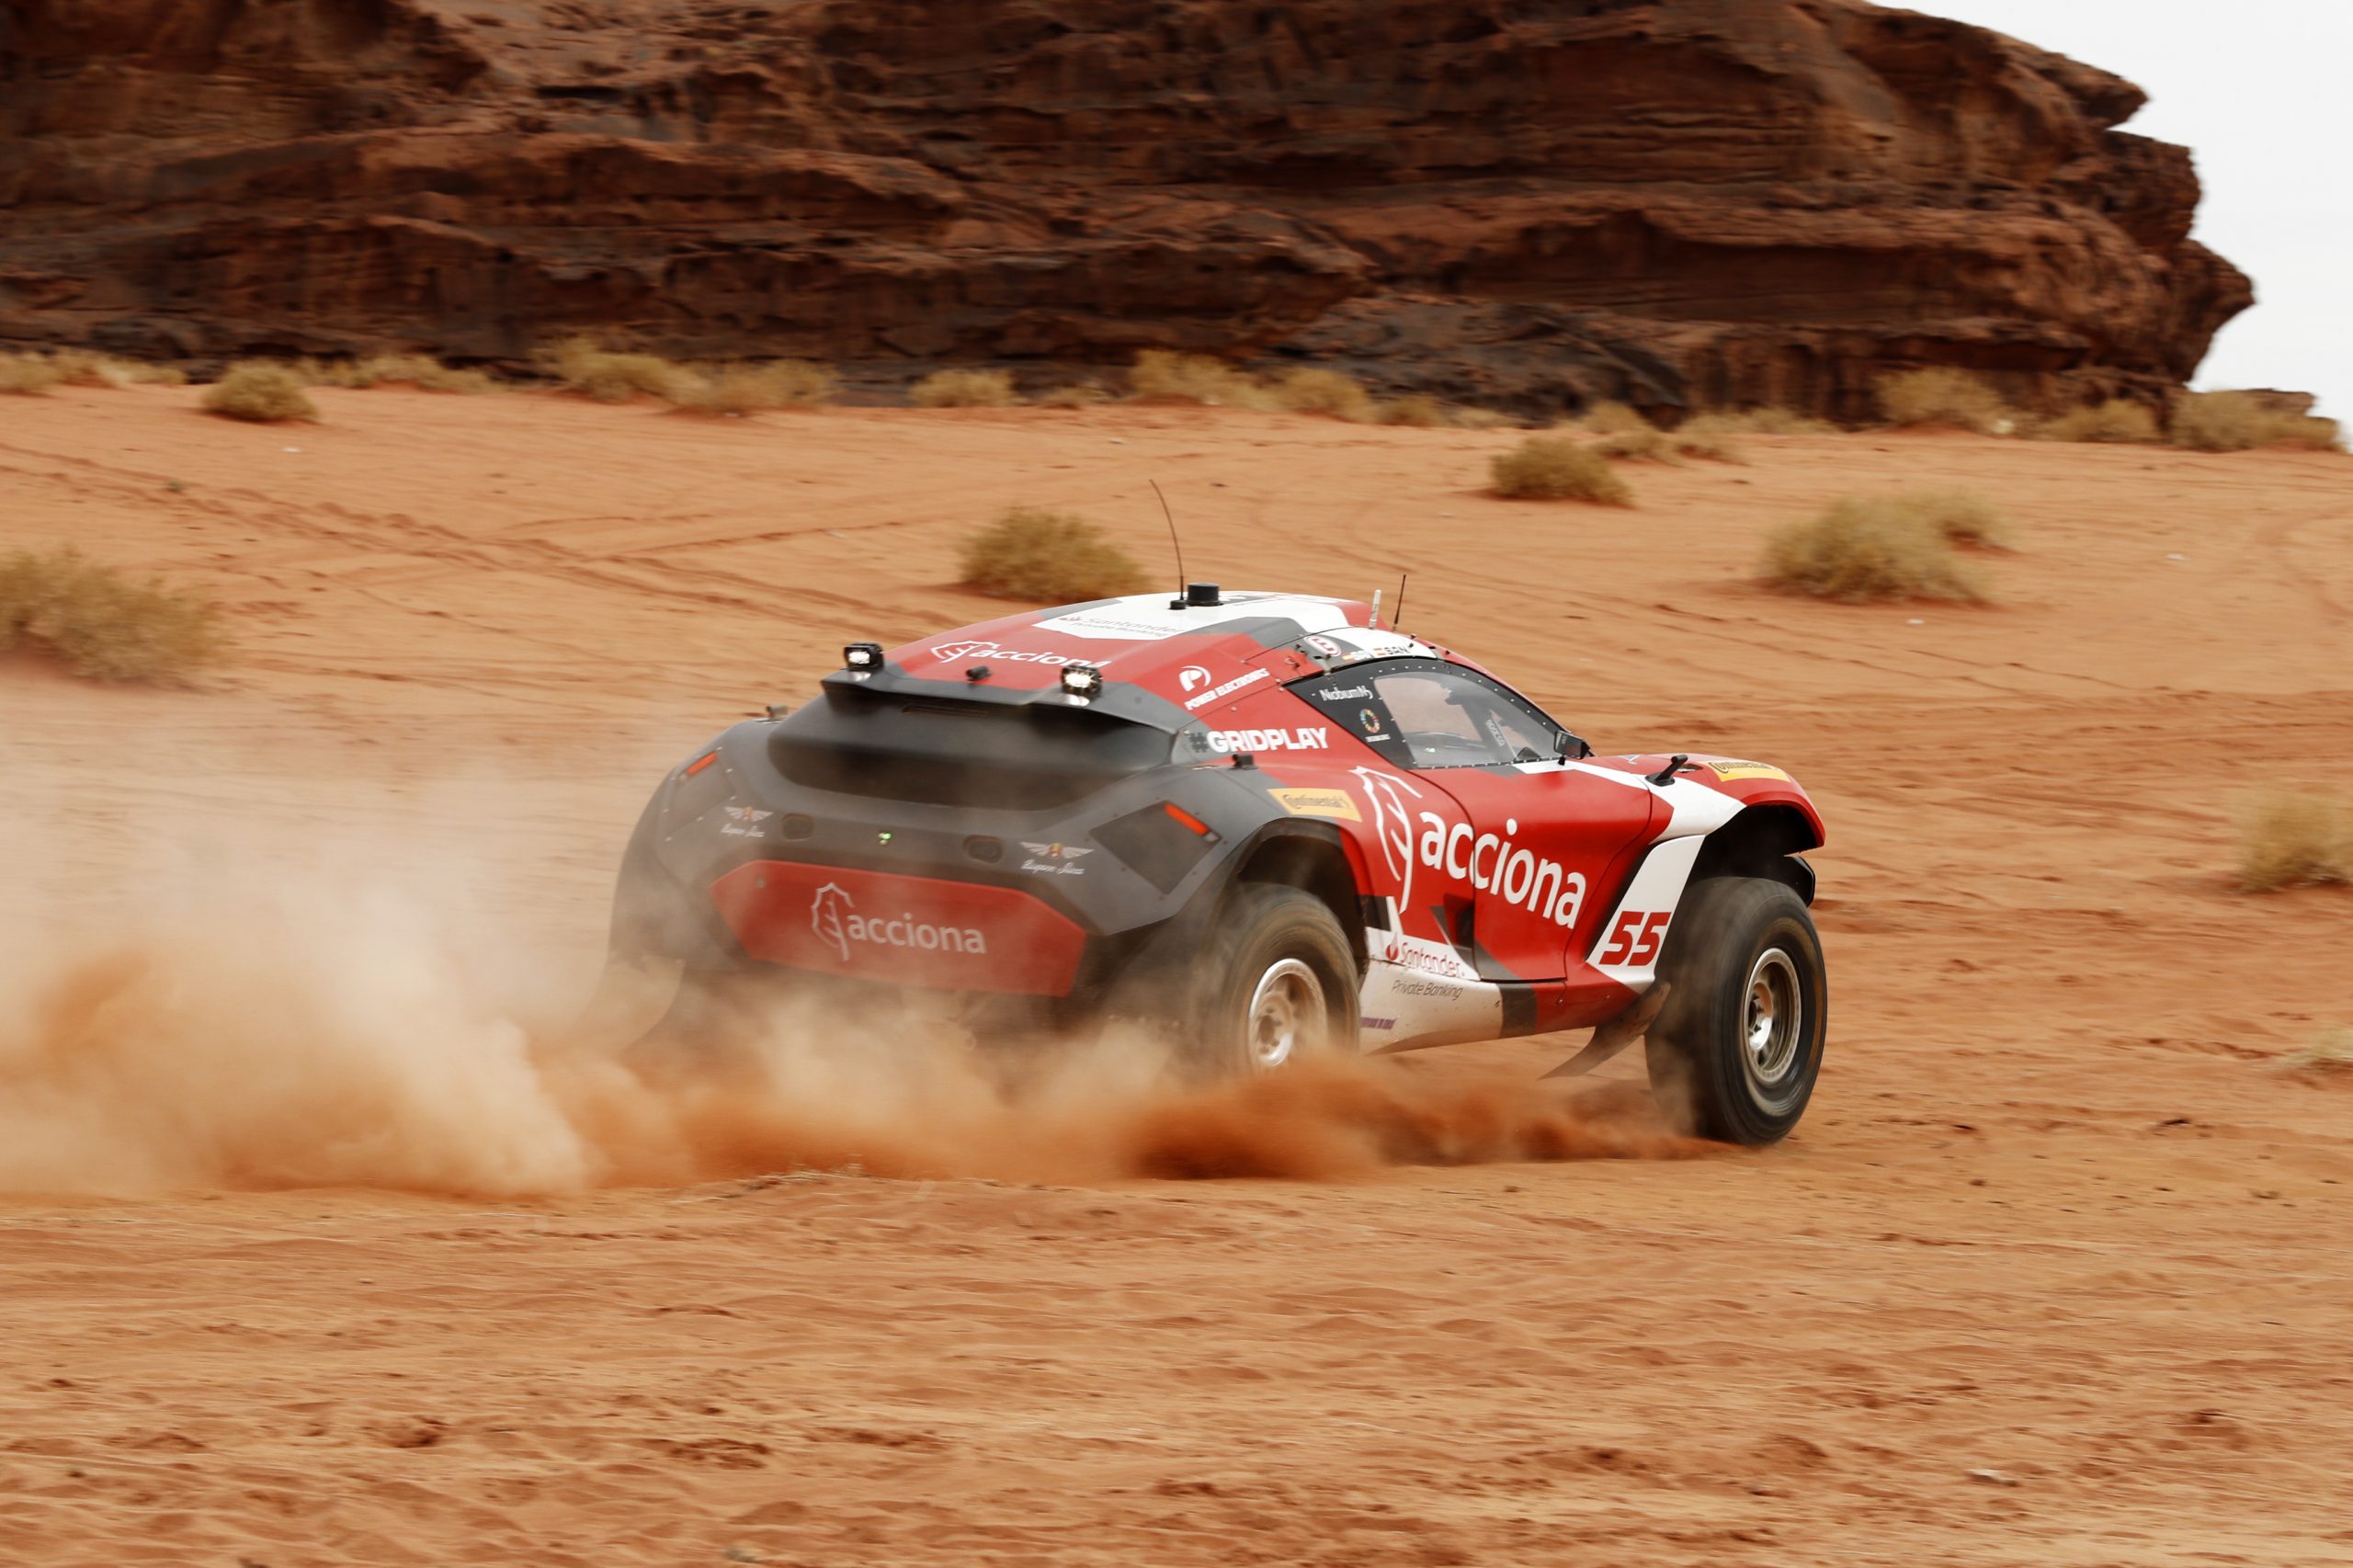 ACCIONA | SAINZ XE Team is second at the Desert X Prix, its best result to date, QEV